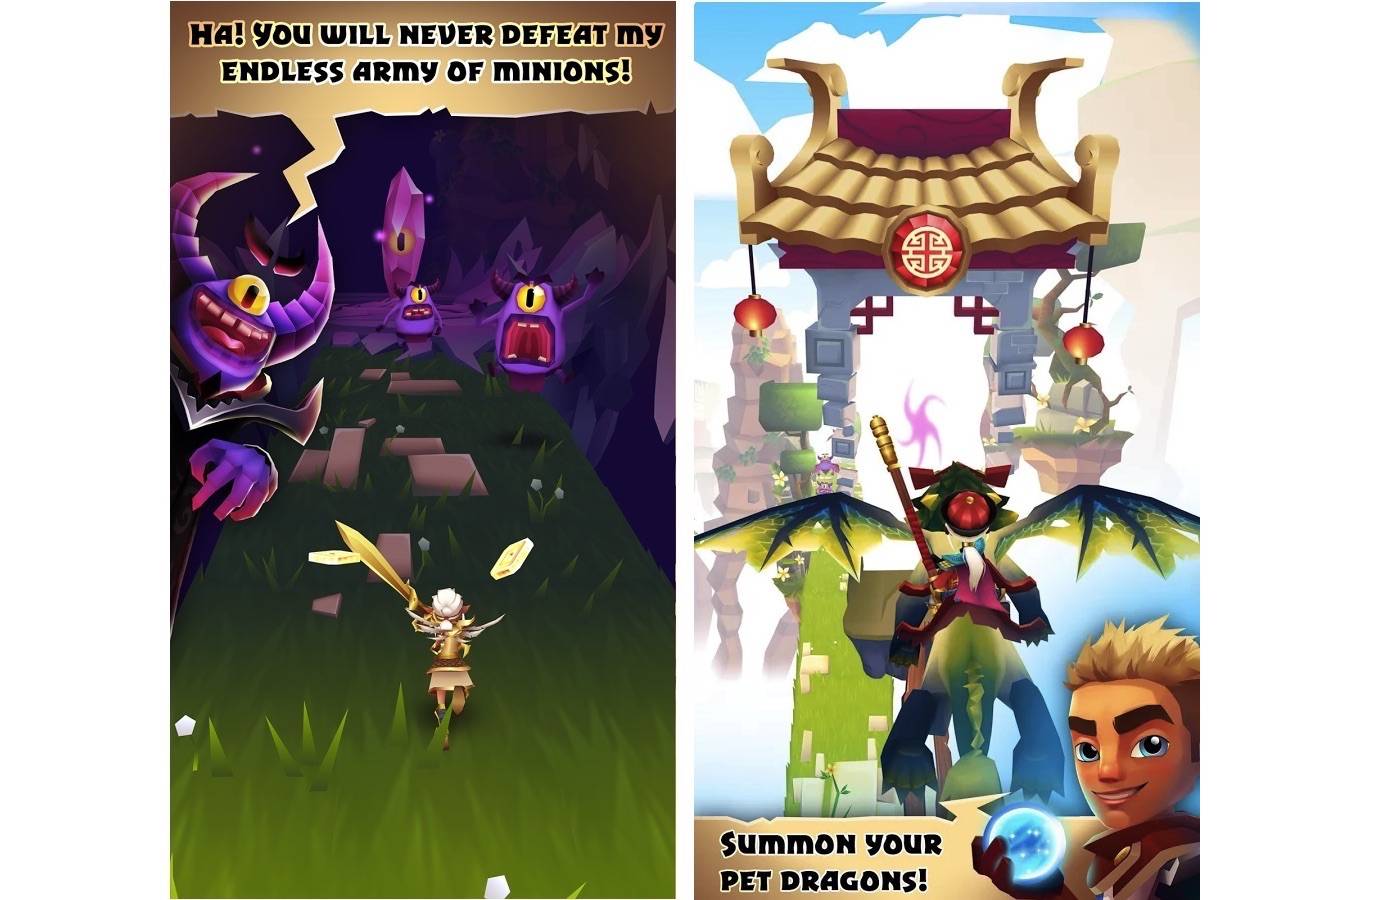 blades of brim ios to android